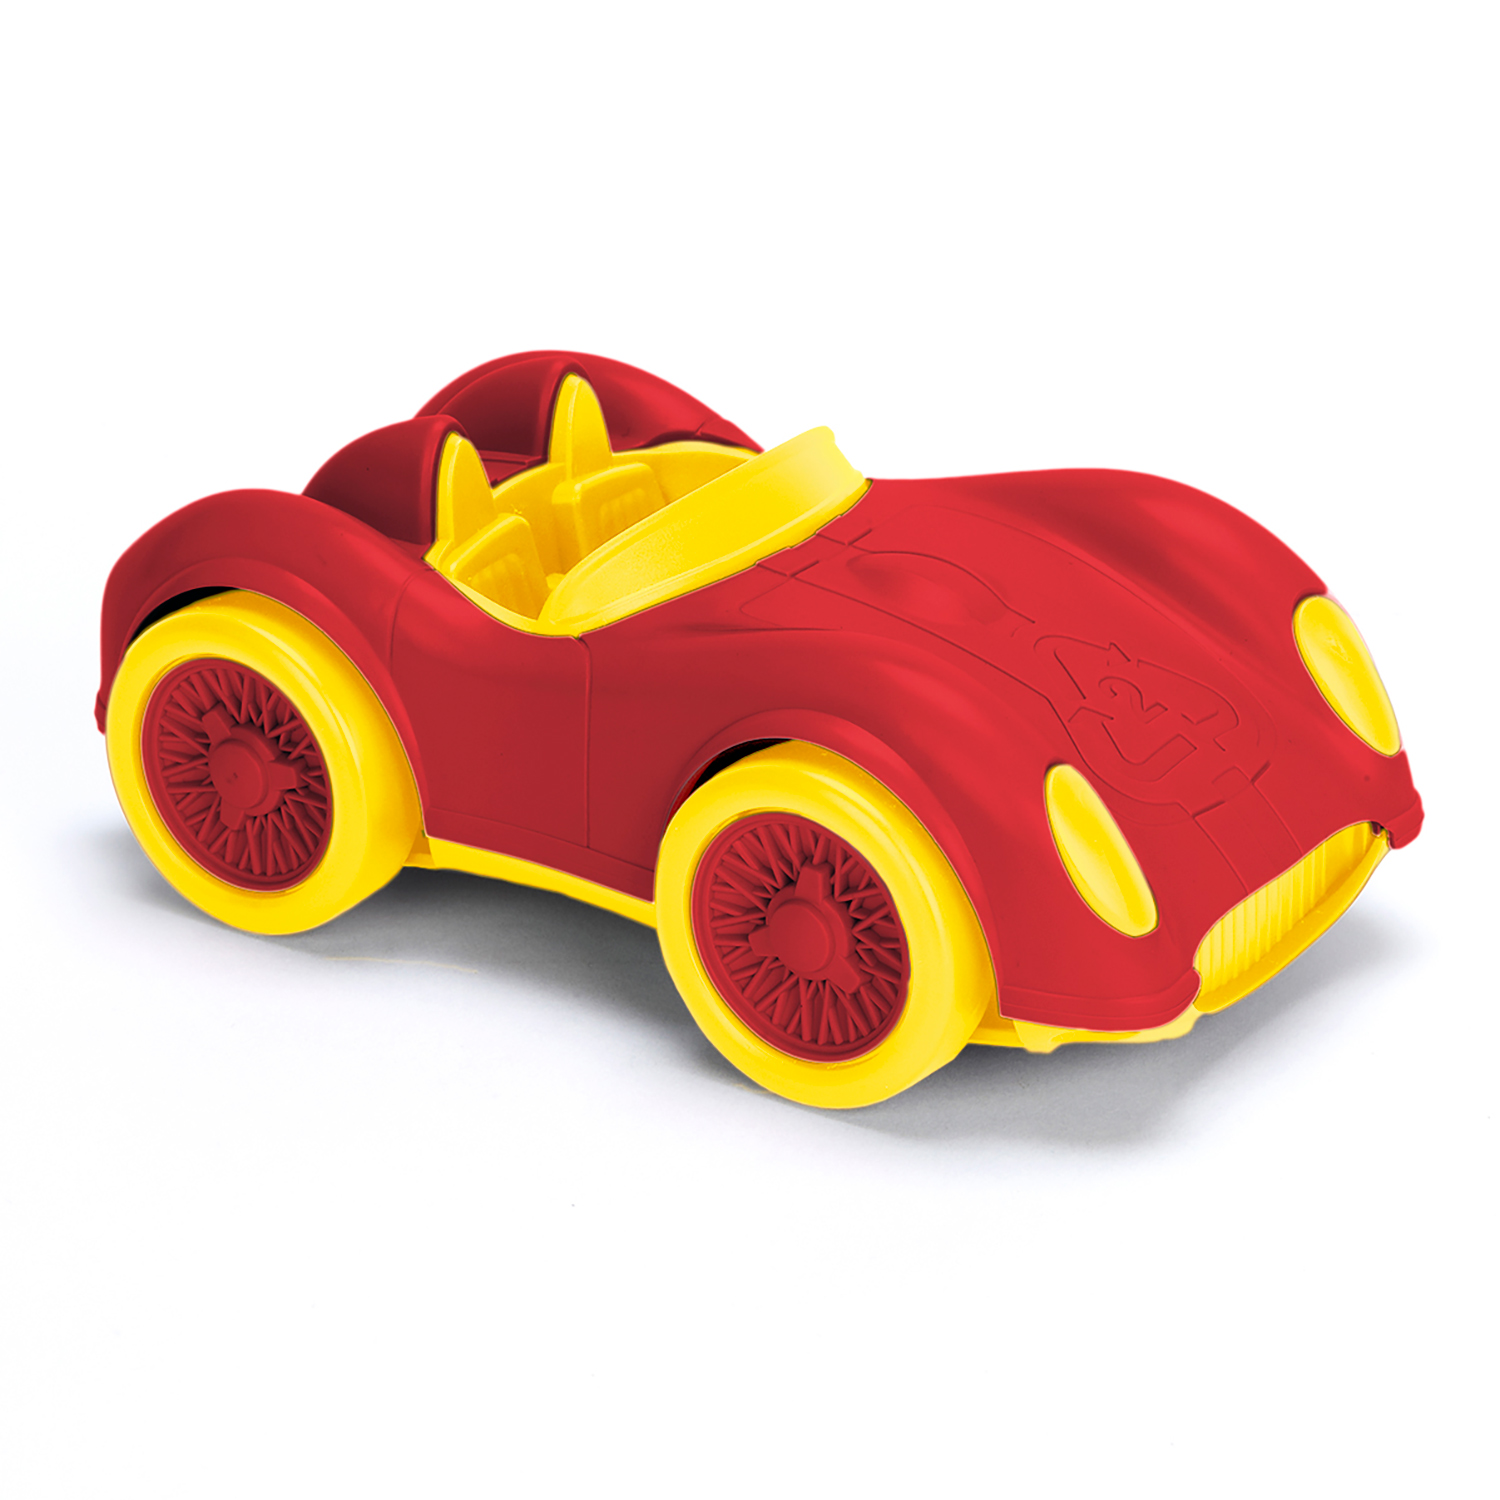 PBS KIDS Race Car - Red and Yellow